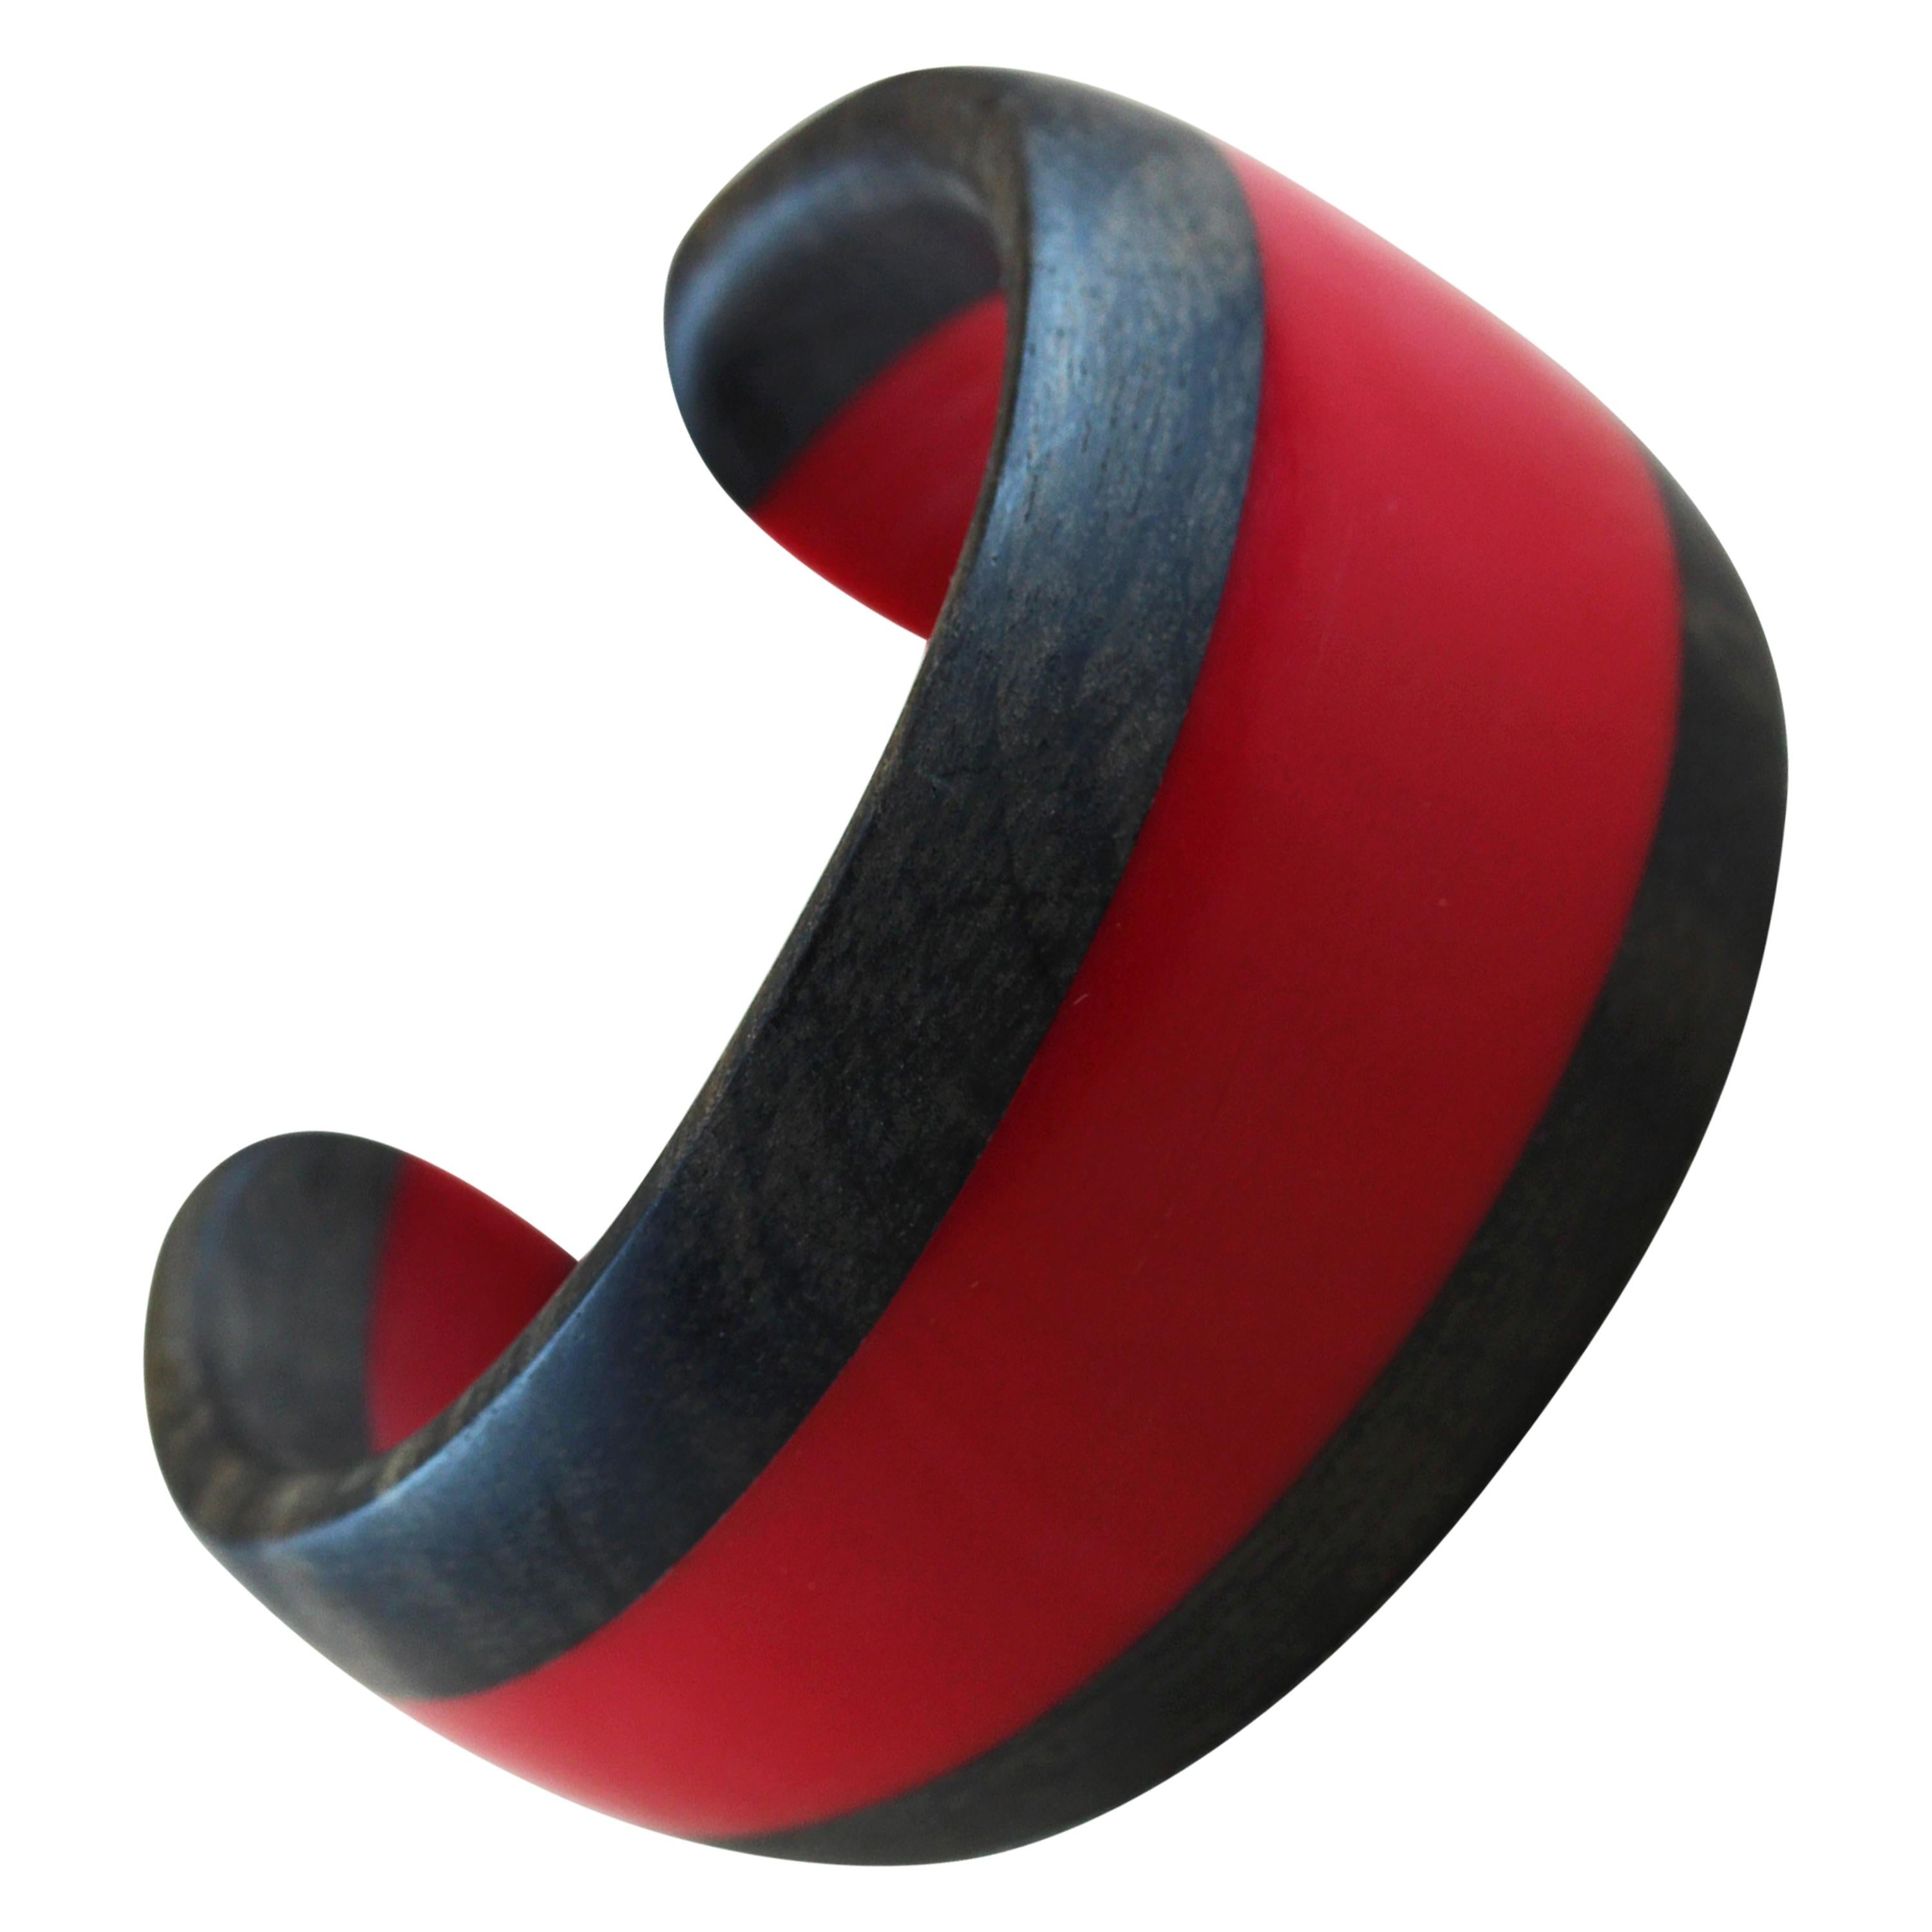 Cuff Bracelet in Wood and Red Methacrylate